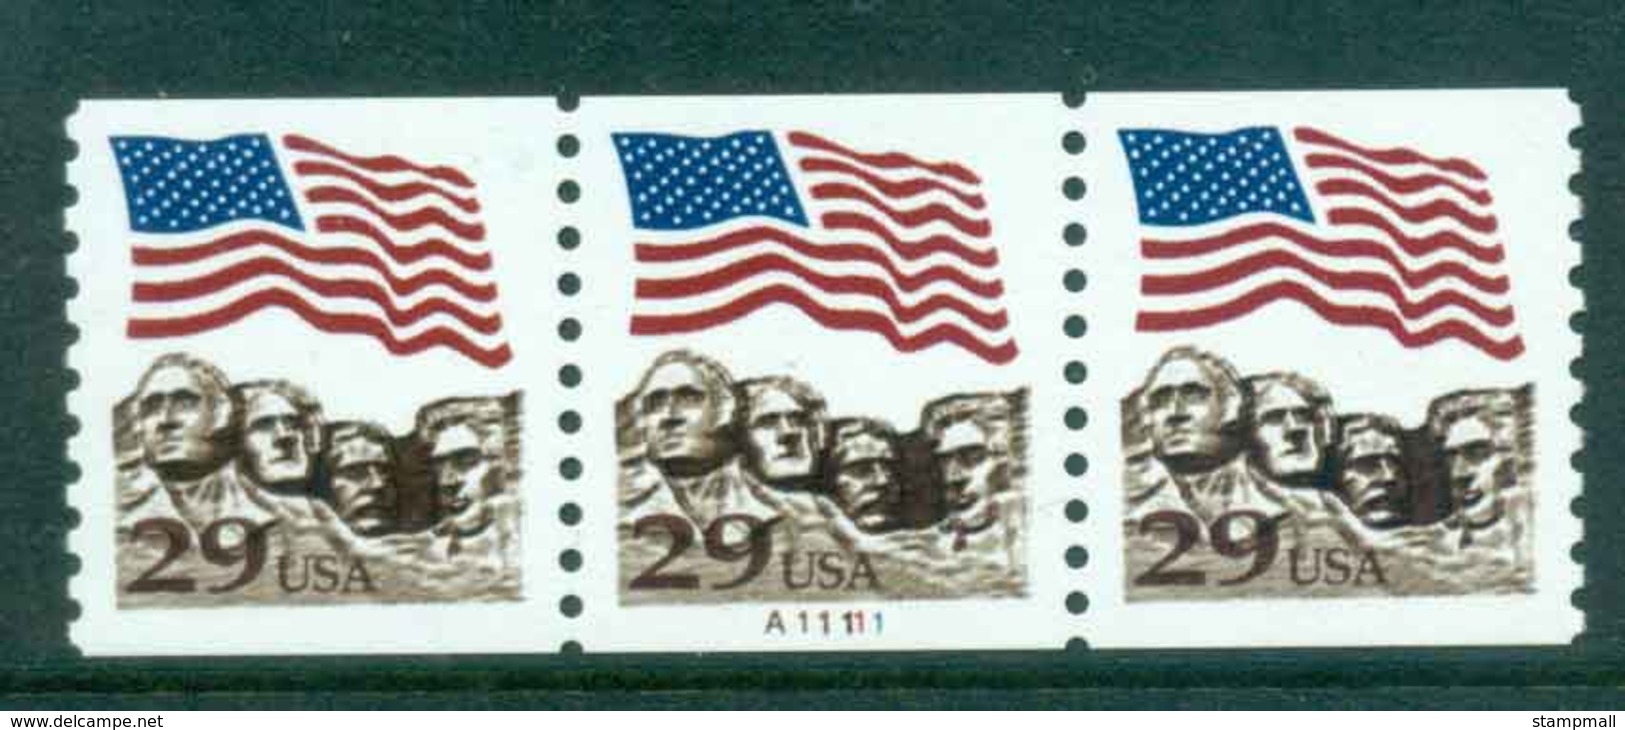 USA 1991 Sc#2523A 29c Flag Over Mt Rushmore Photogravure Coil P#A11111 Str 3 MUH Lot47516 - Coils (Plate Numbers)